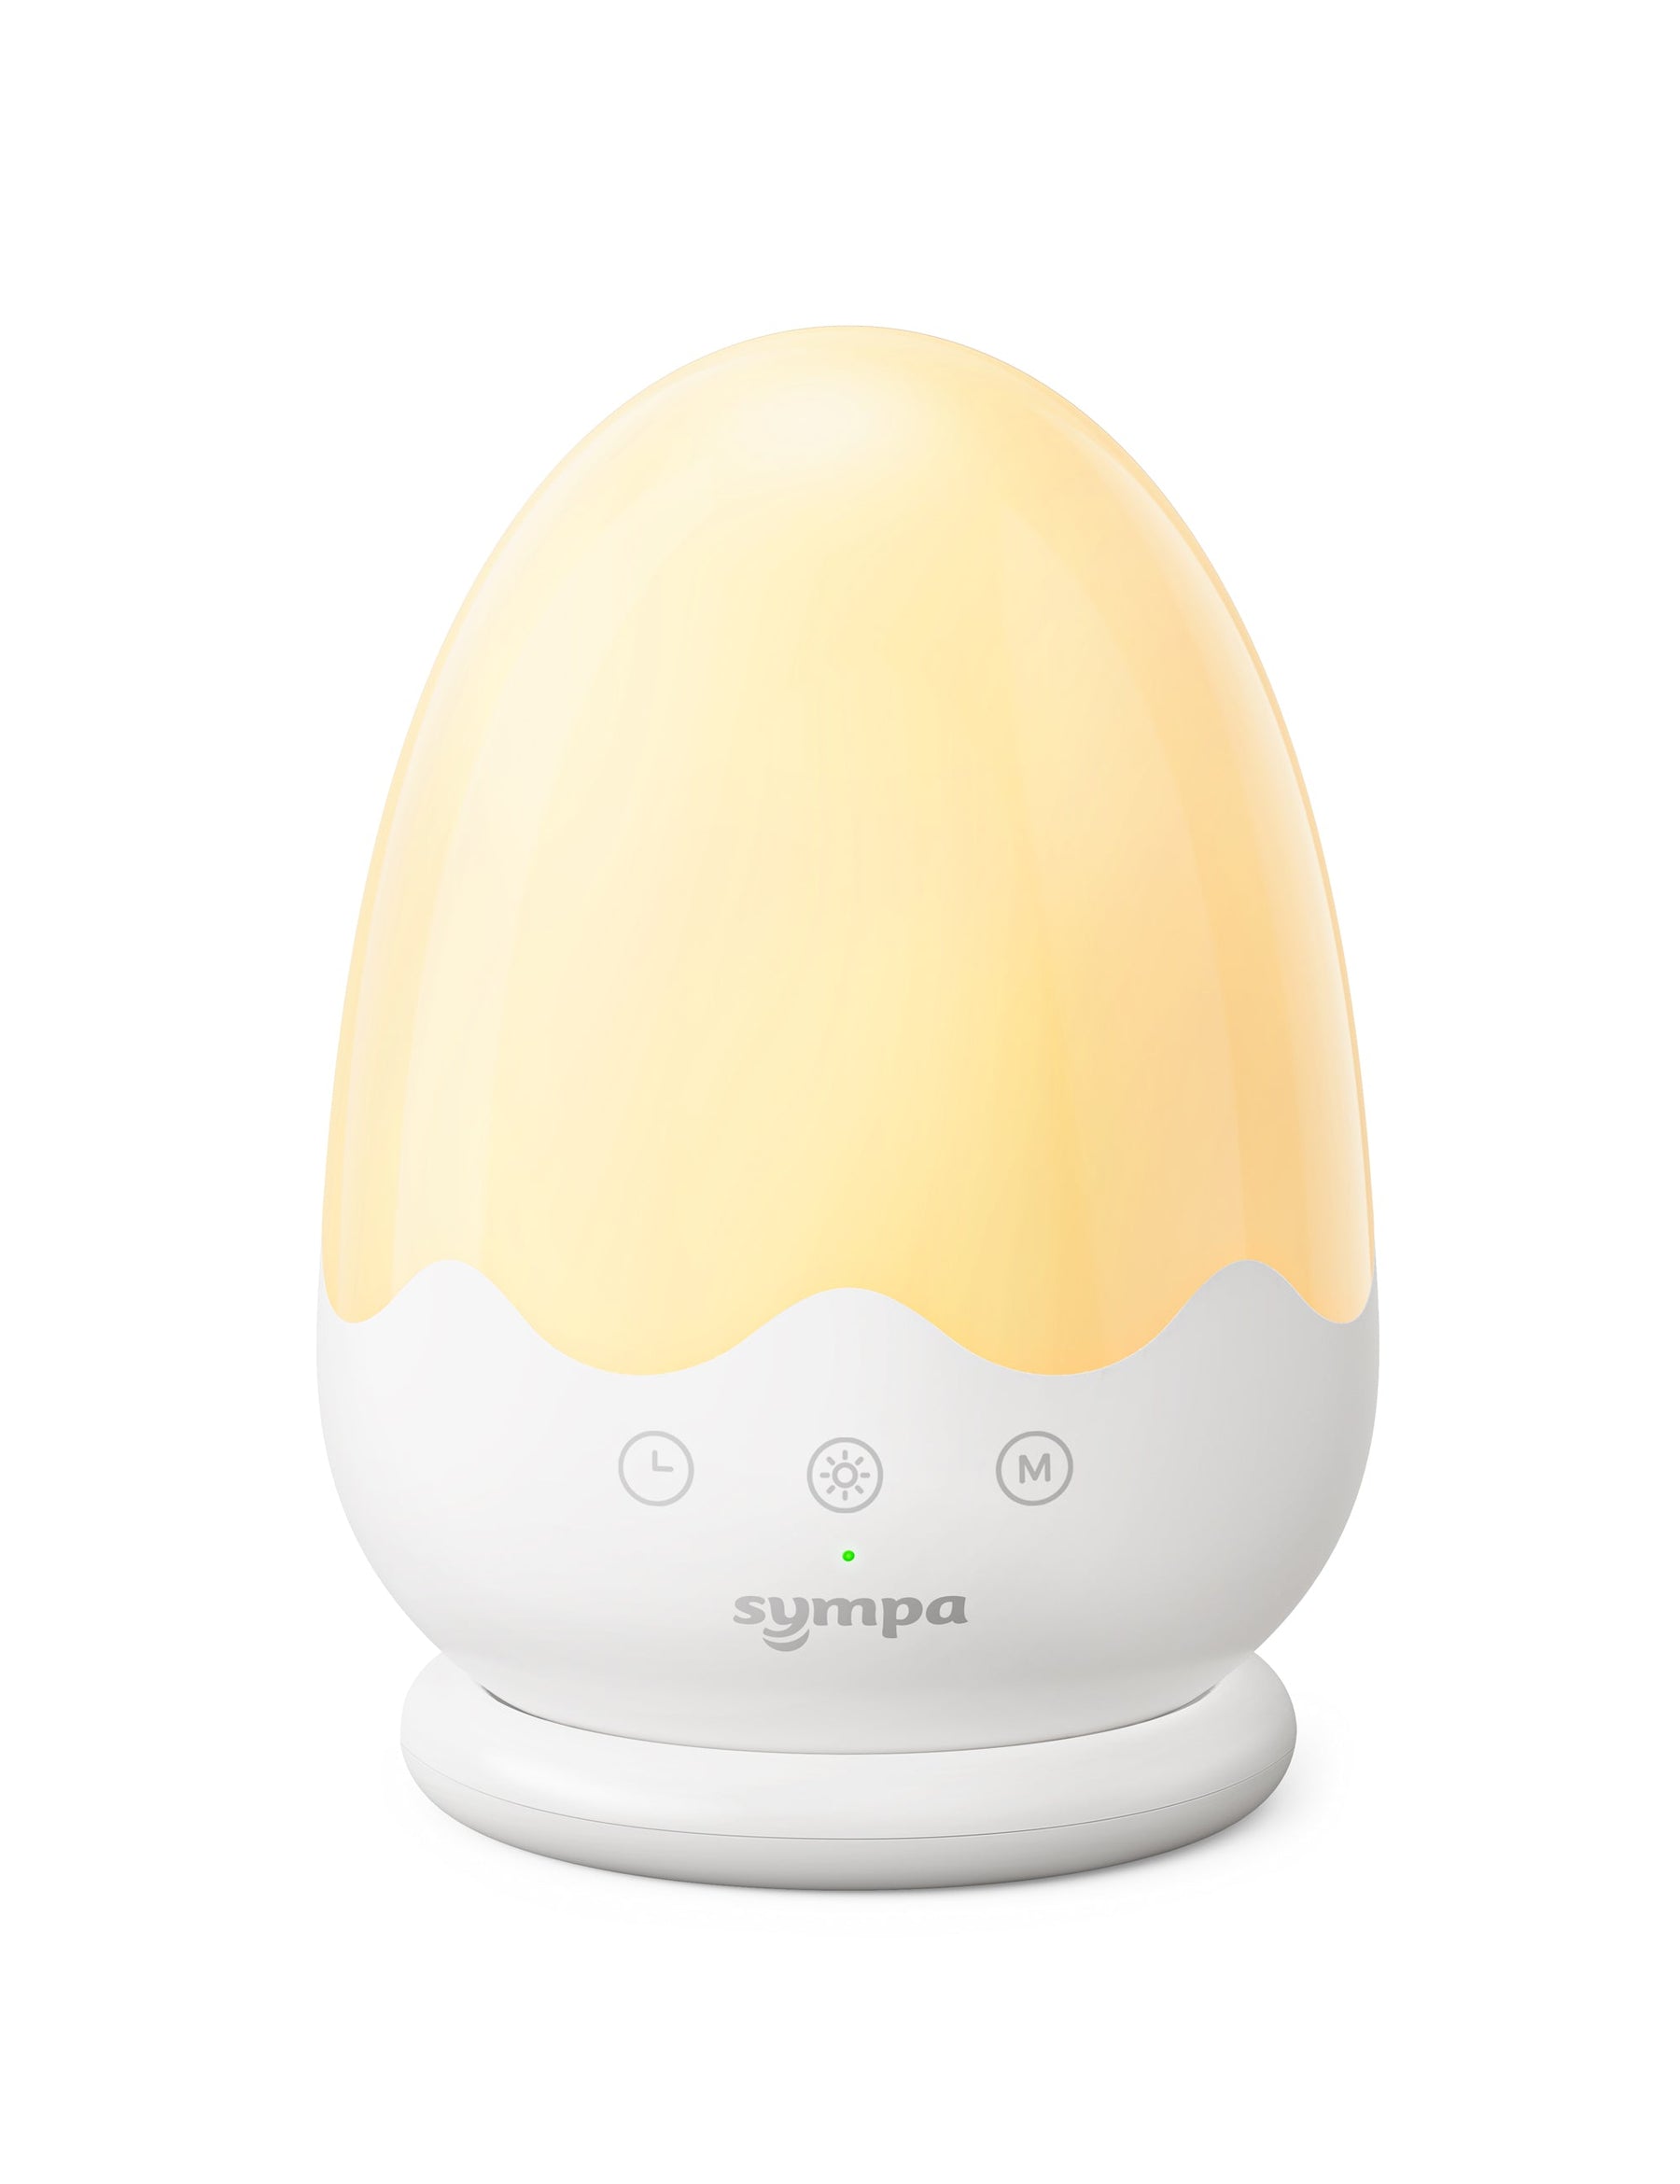 Dimmable Baby Night Light for Breastfeeding & Reading